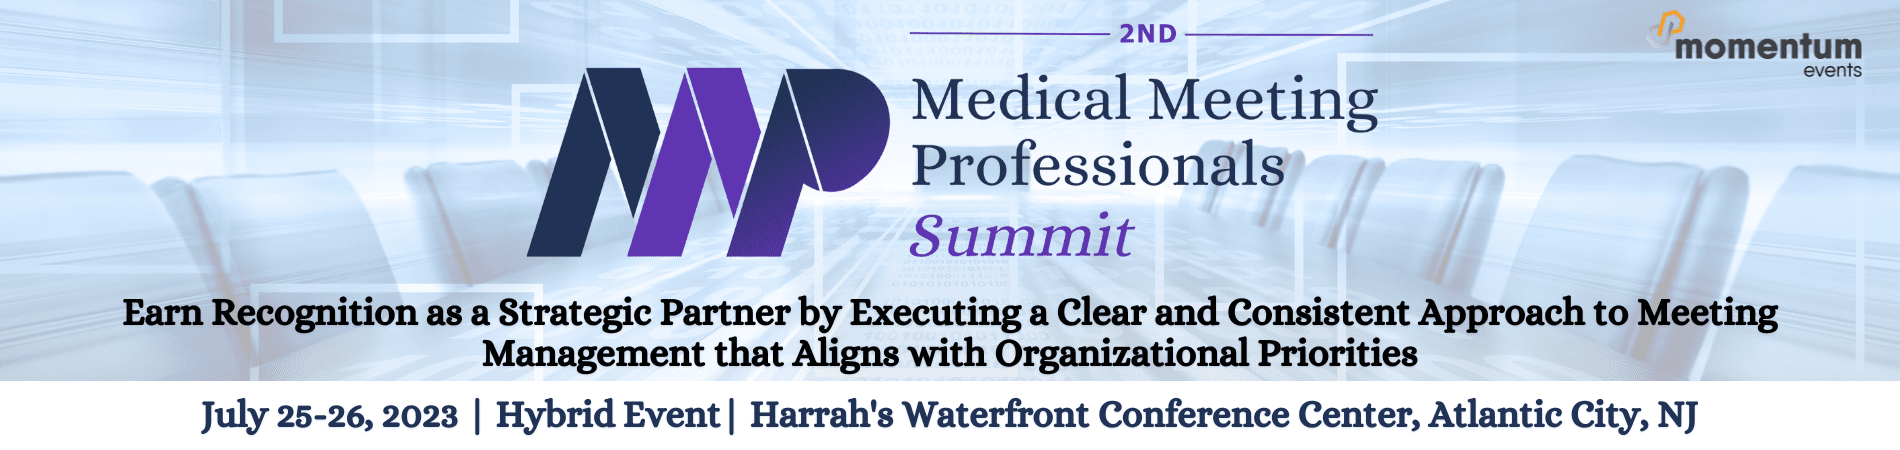 2nd Medical Meeting Professionals Virtual Summit, Earn Recognition as a Strategic Partner by Executing a Clear and Consistent Approach to Meeting Management that Aligns with Organizational Priorities, July 25-26, 2023, Hybrid Event, Harrah's Waterfront Conference Center Atlantic City, NJ